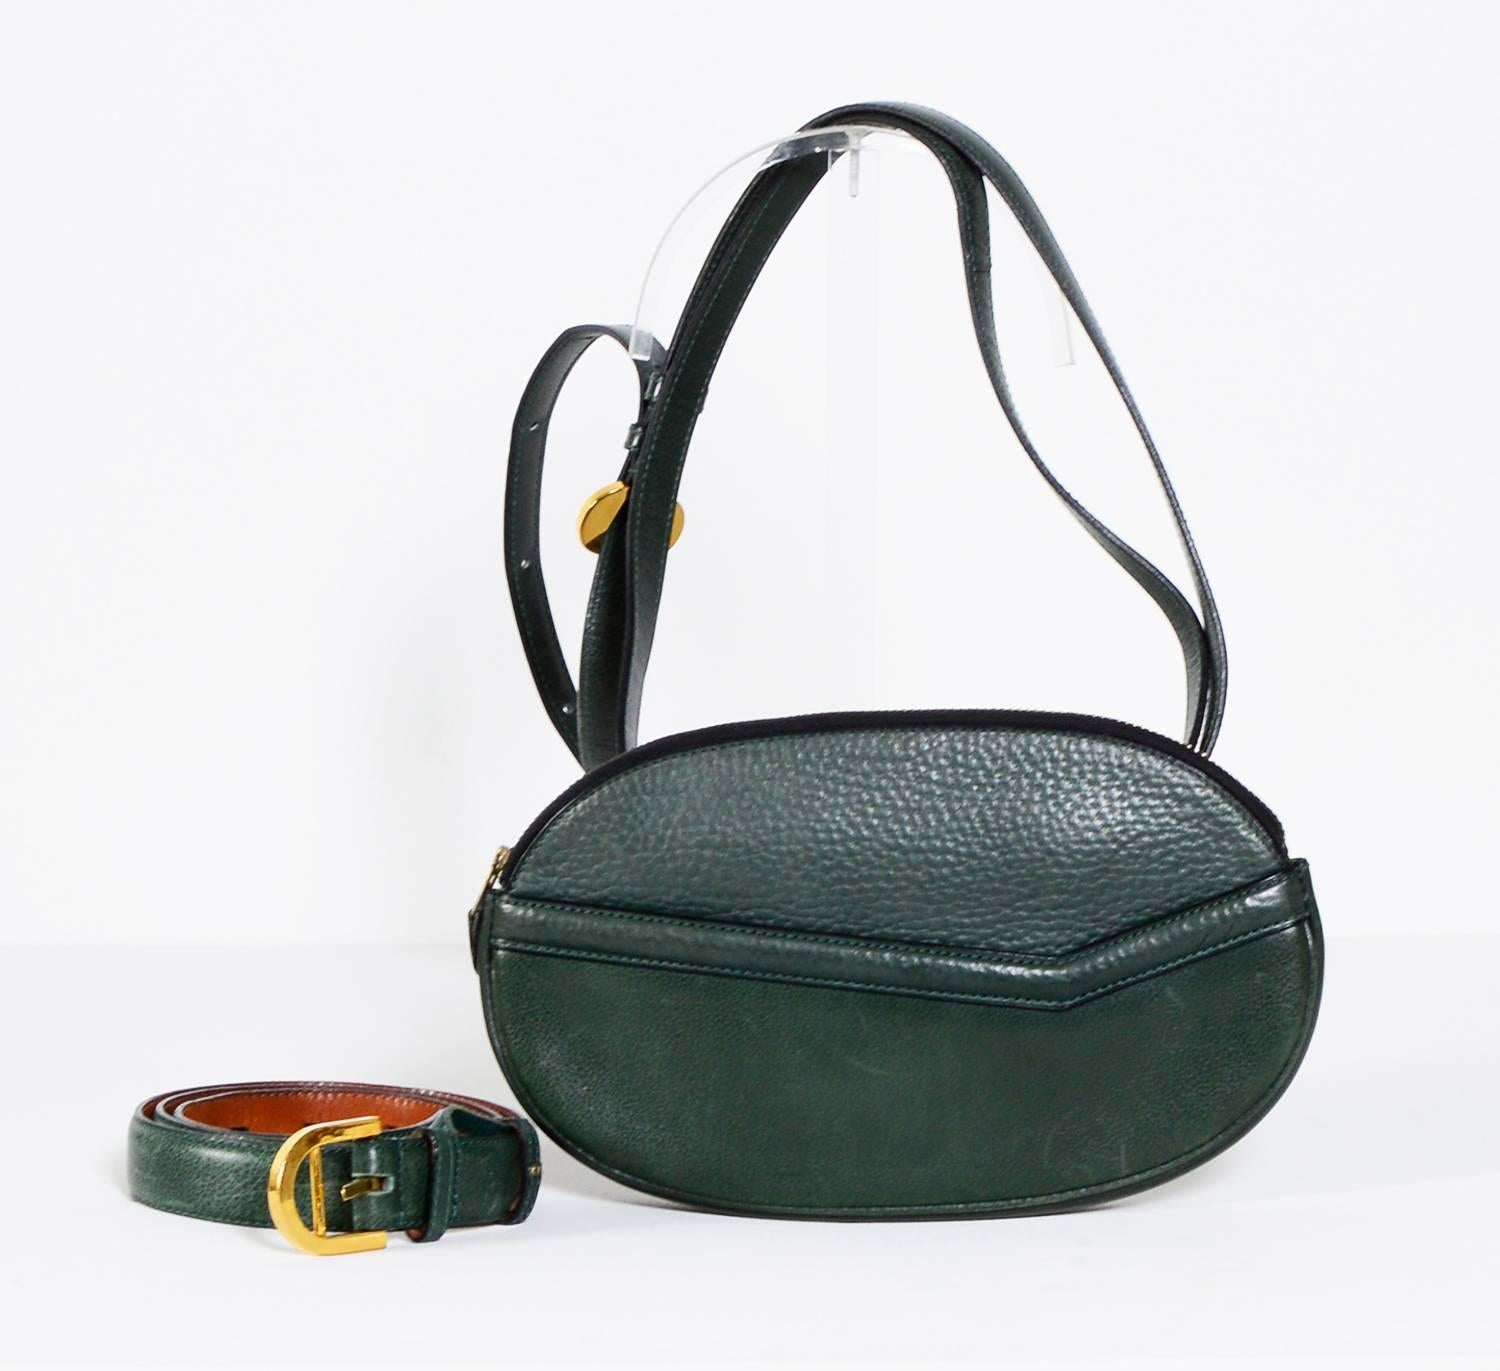 Delvaux green hip bag with matching belt. 
Premium Belgium luxury leather goods brand Delvaux excels in both style and quality. Excellent vintage condition, hardly used.